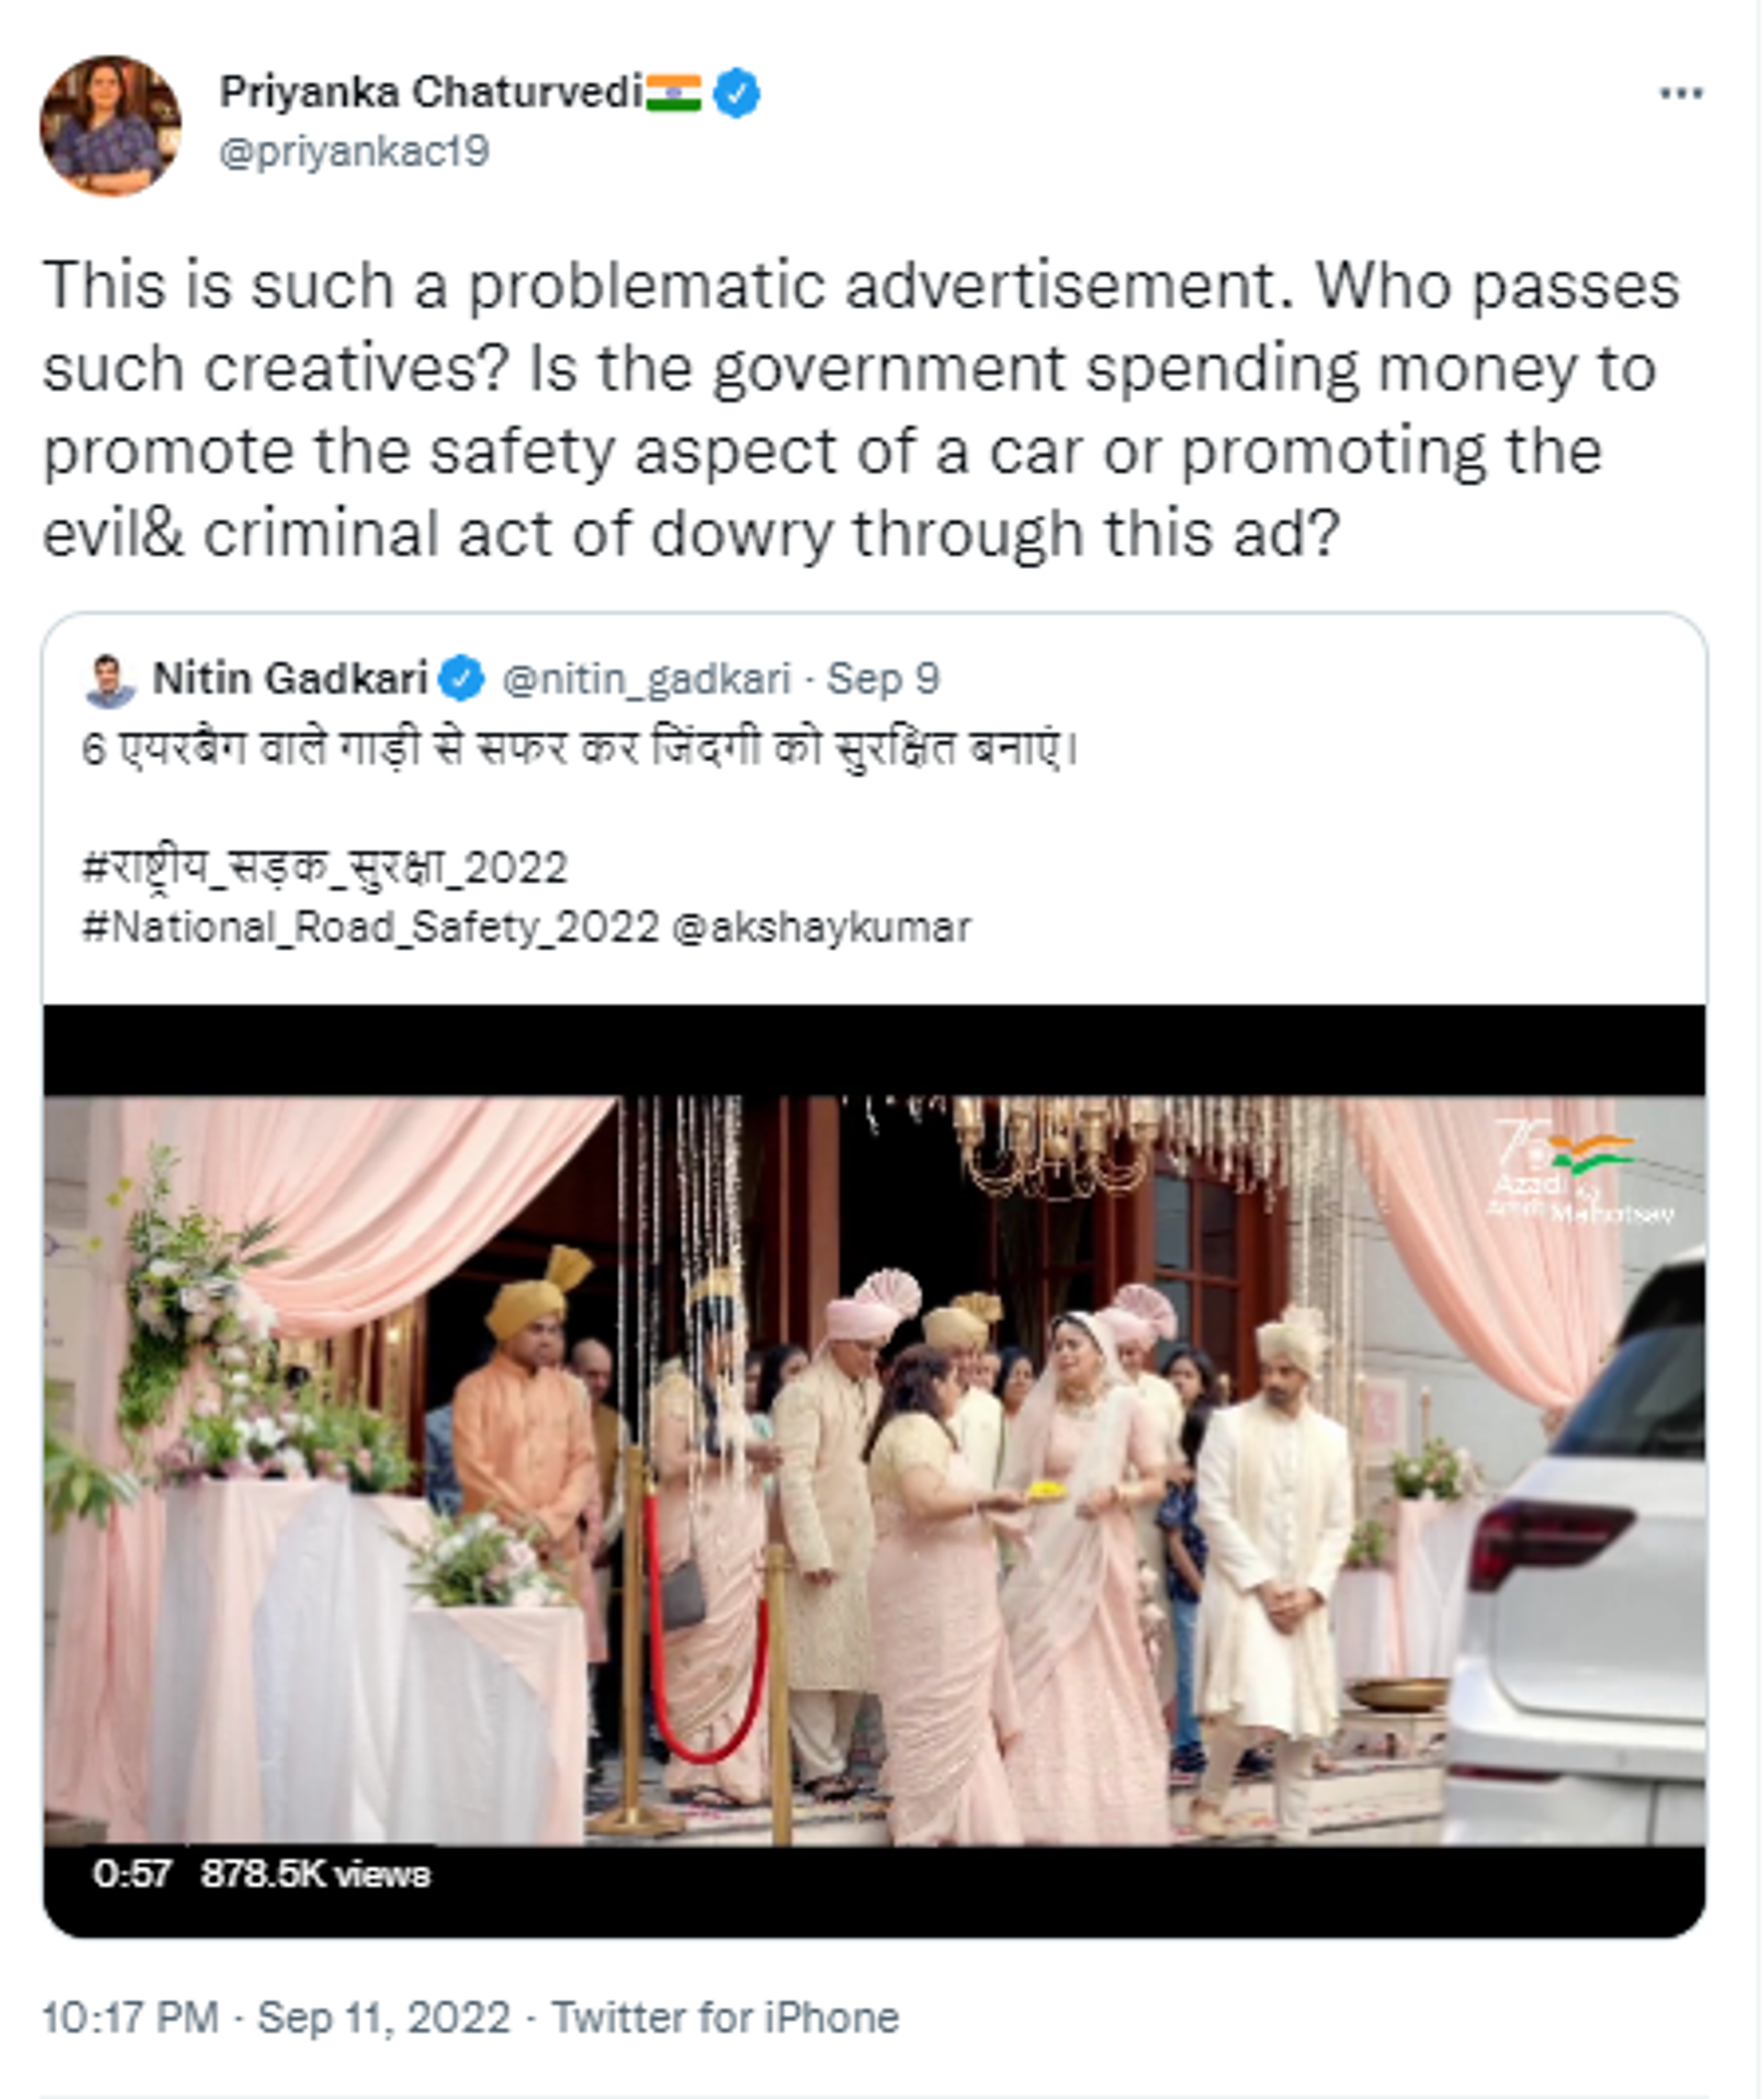 Road safety advertisement featuring Bollywood Actor Akshay Kumar faces flak for promoting dowry - Sputnik International, 1920, 12.09.2022